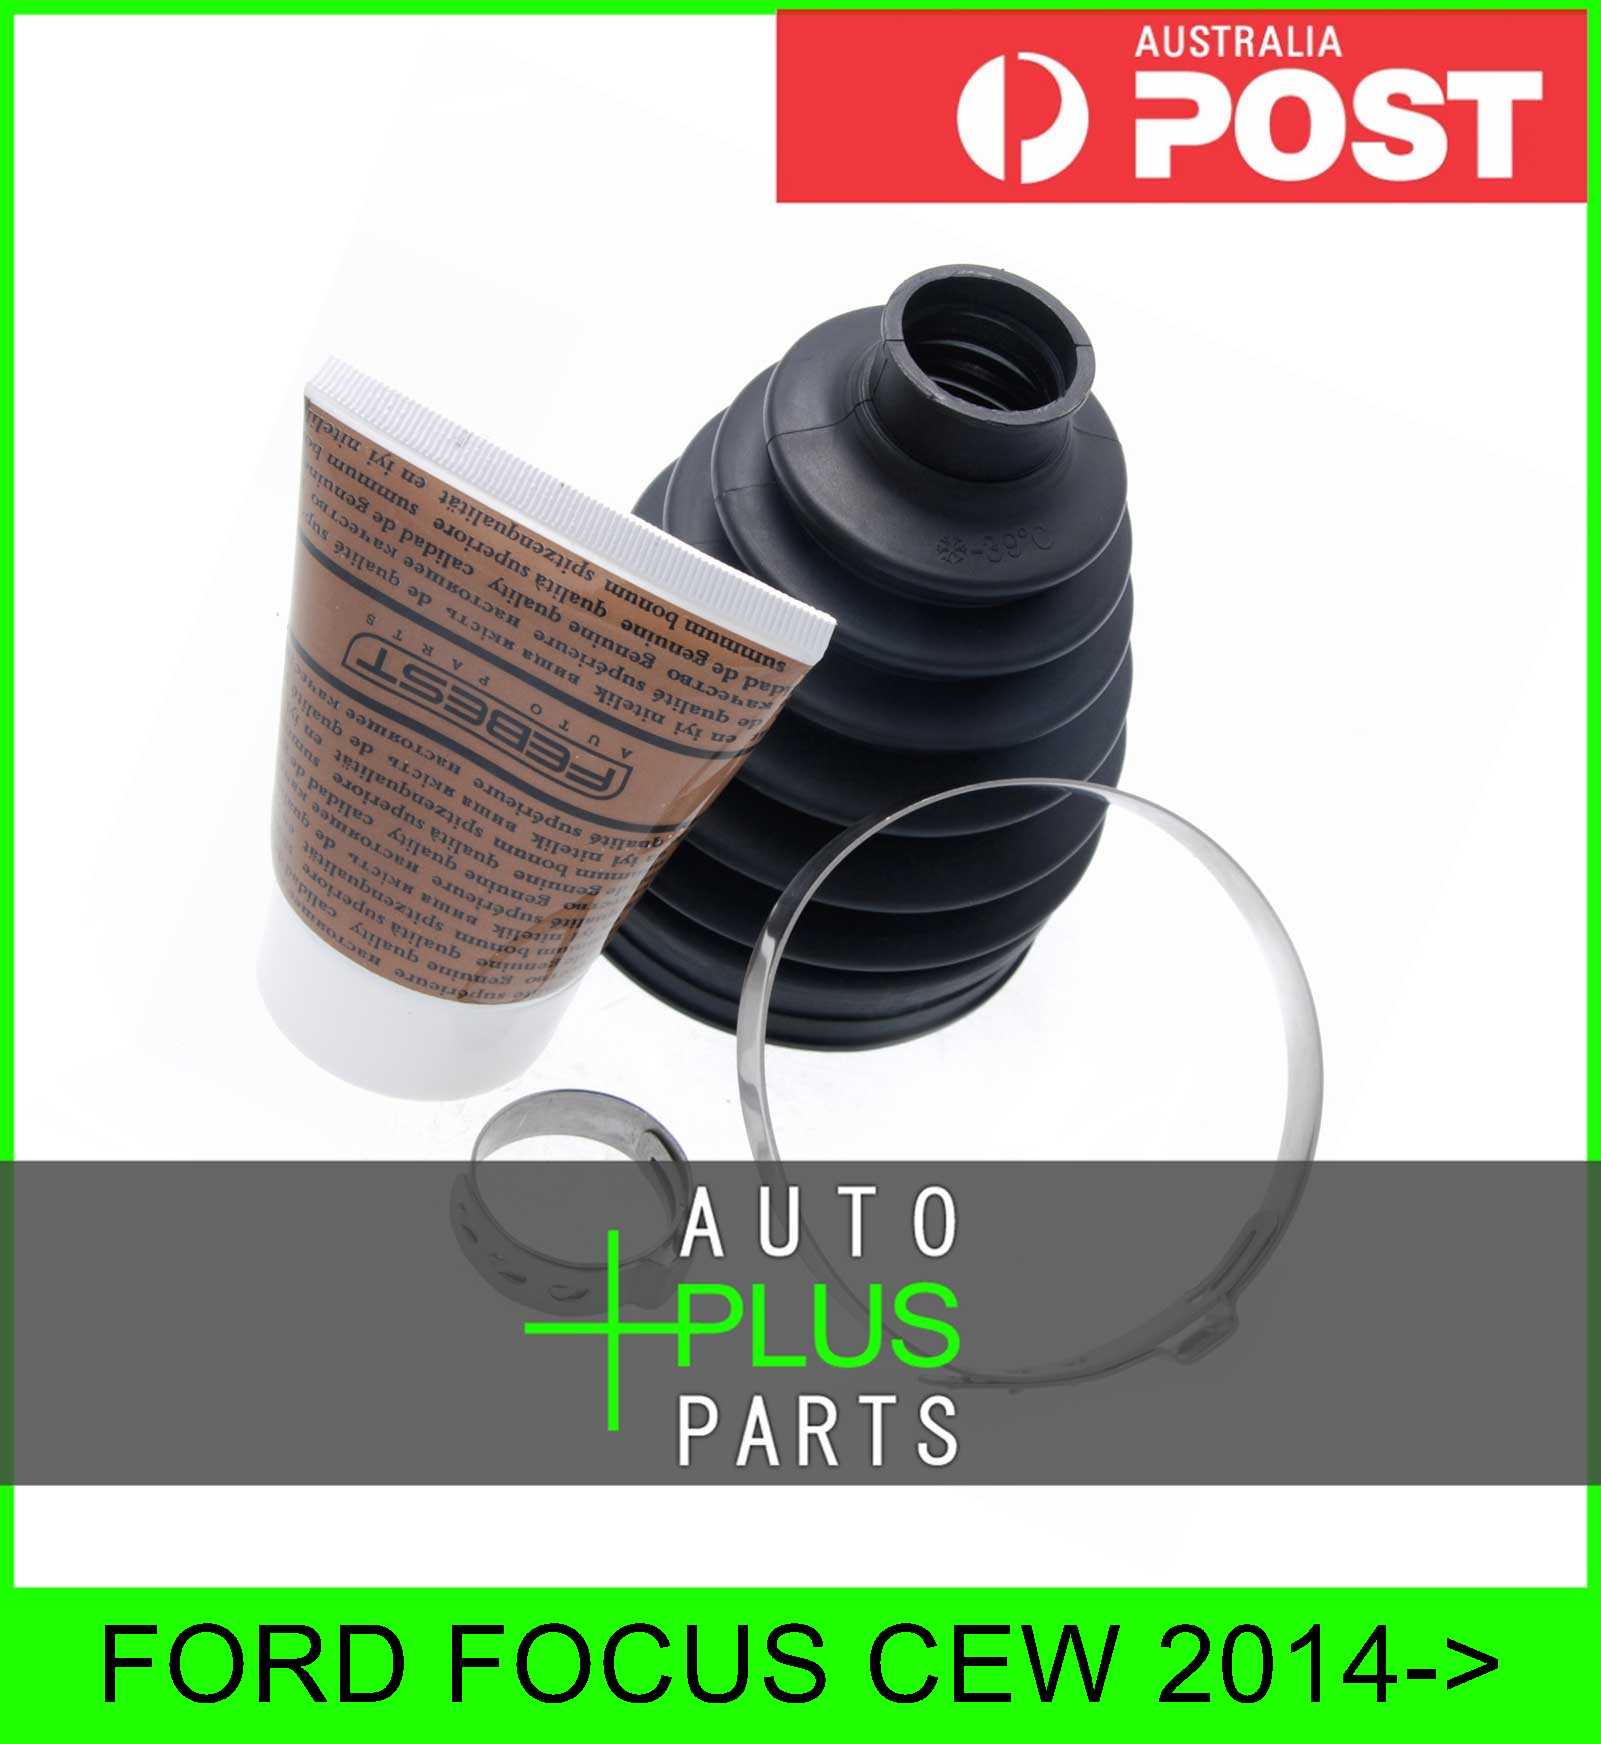 Fits FORD FOCUS CEW Outer C.V. Joint Boot (79.5X119X23.5) Kit | eBay